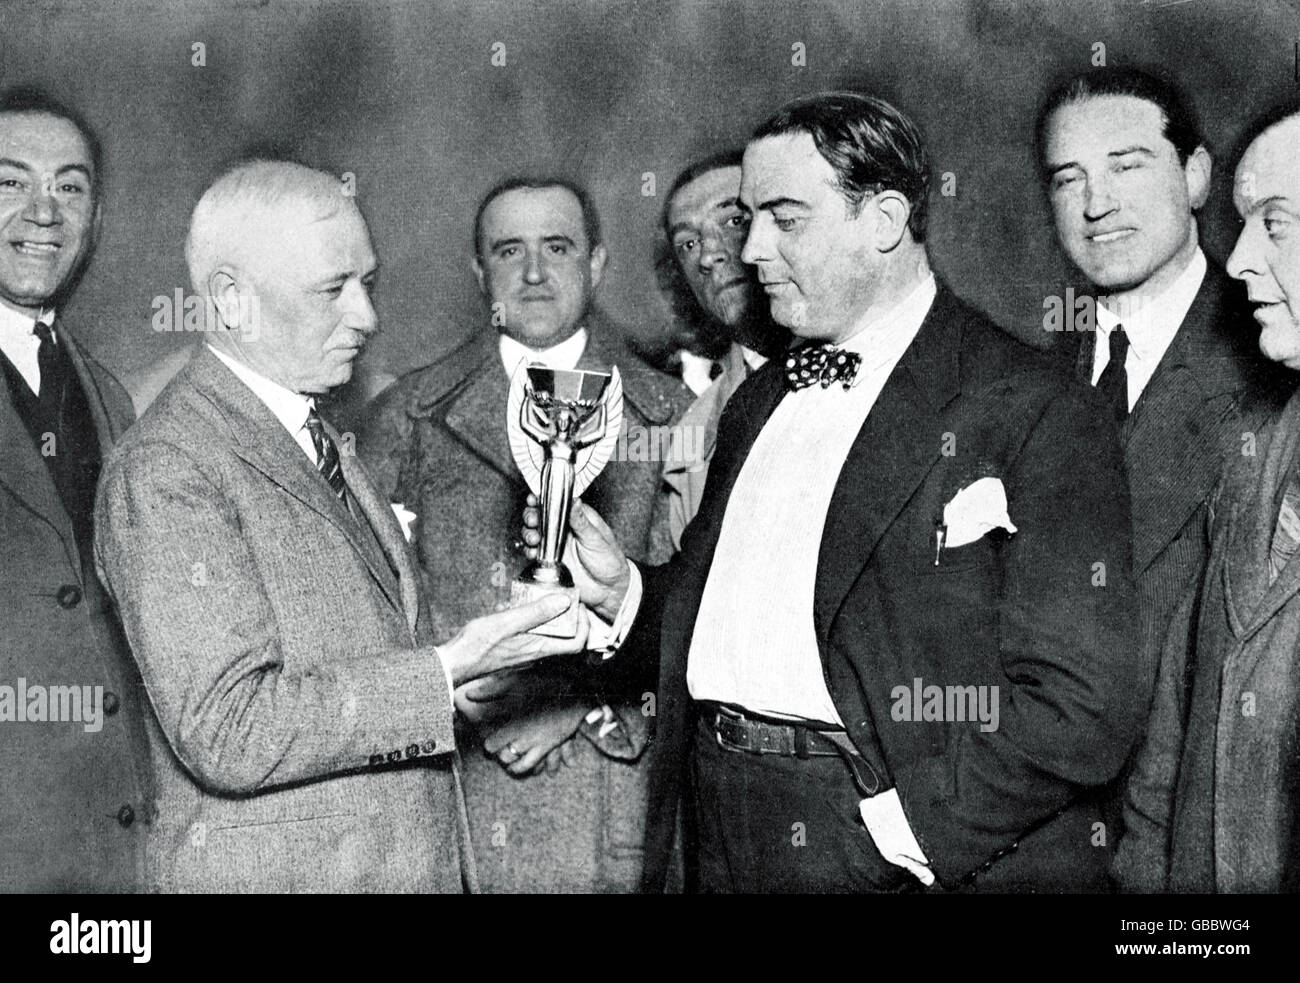 (L-R) FIFA President Jules Rimet presents the World Cup to Dr Paul Jude, President of the Uruguayan Football Association, following his team's 4-2 win in the final Stock Photo